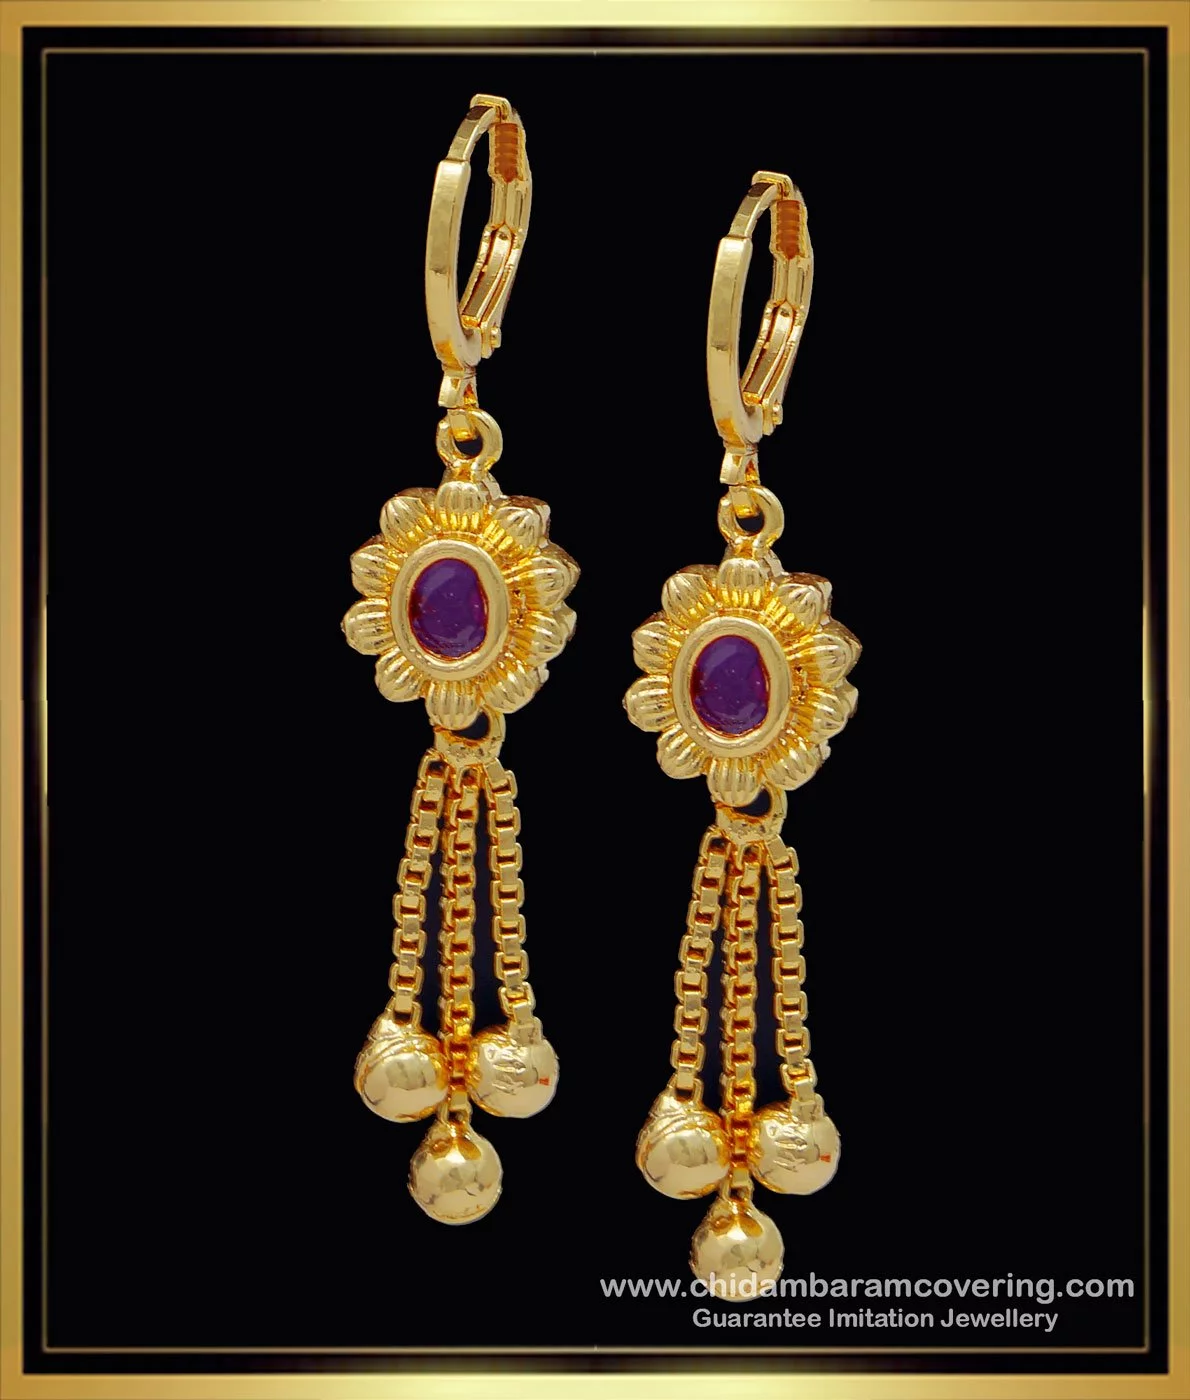 Latest Earrings Design 2019 For Girls and Womens | Latest earrings design,  Simple gold earrings, Gold earrings designs